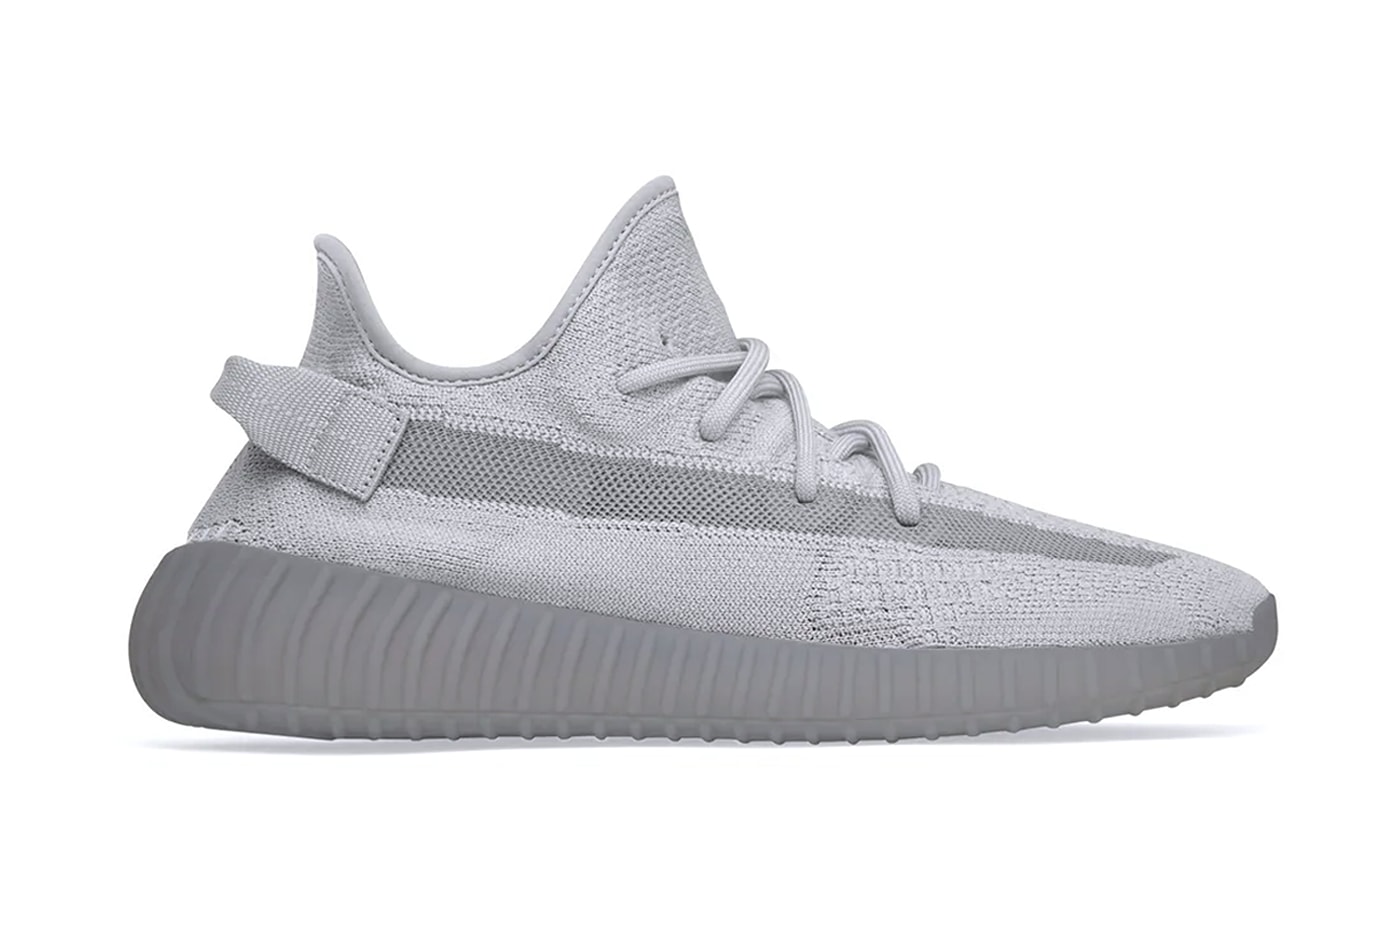 YEEZY BOOST 350 V2 Surfaces in “Steel Grey”